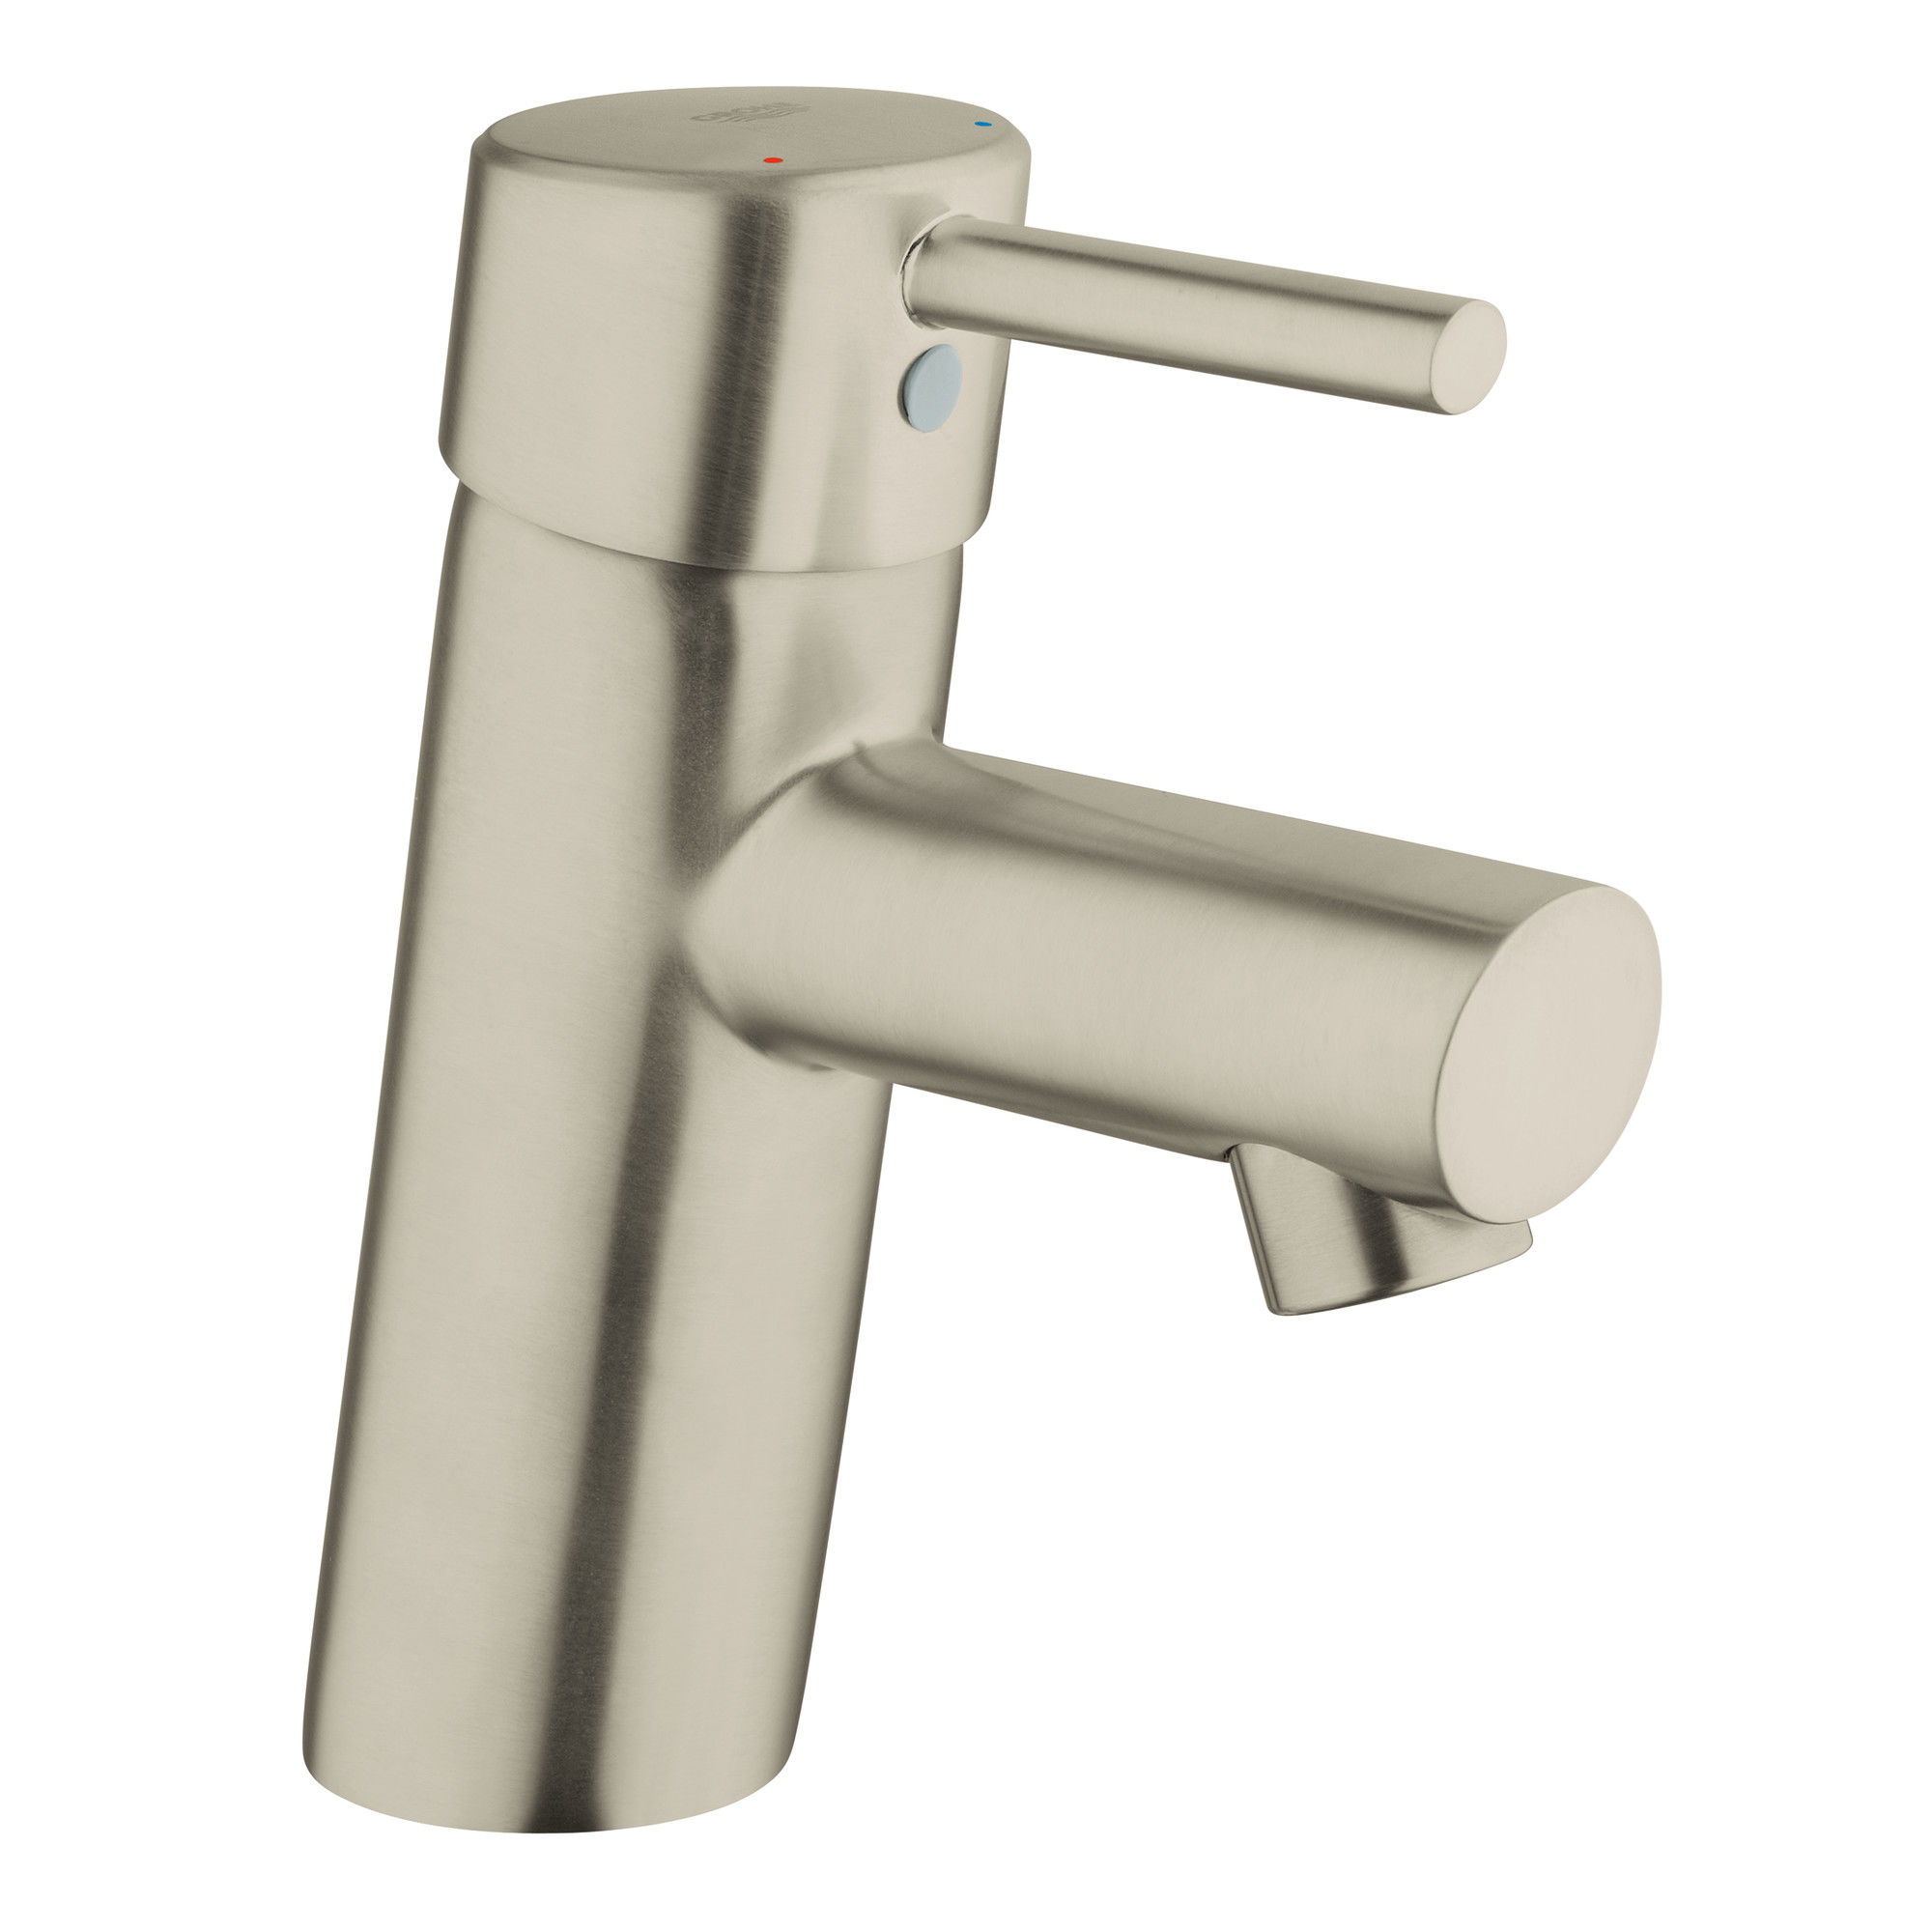 Grohe 34271ena Brushed Nickel Concetto 1 2 Gpm New Bathroom Faucet With Silkmove Cartridge Less Drain Assembly Com - Grohe Bathroom Sink Faucet Cartridge